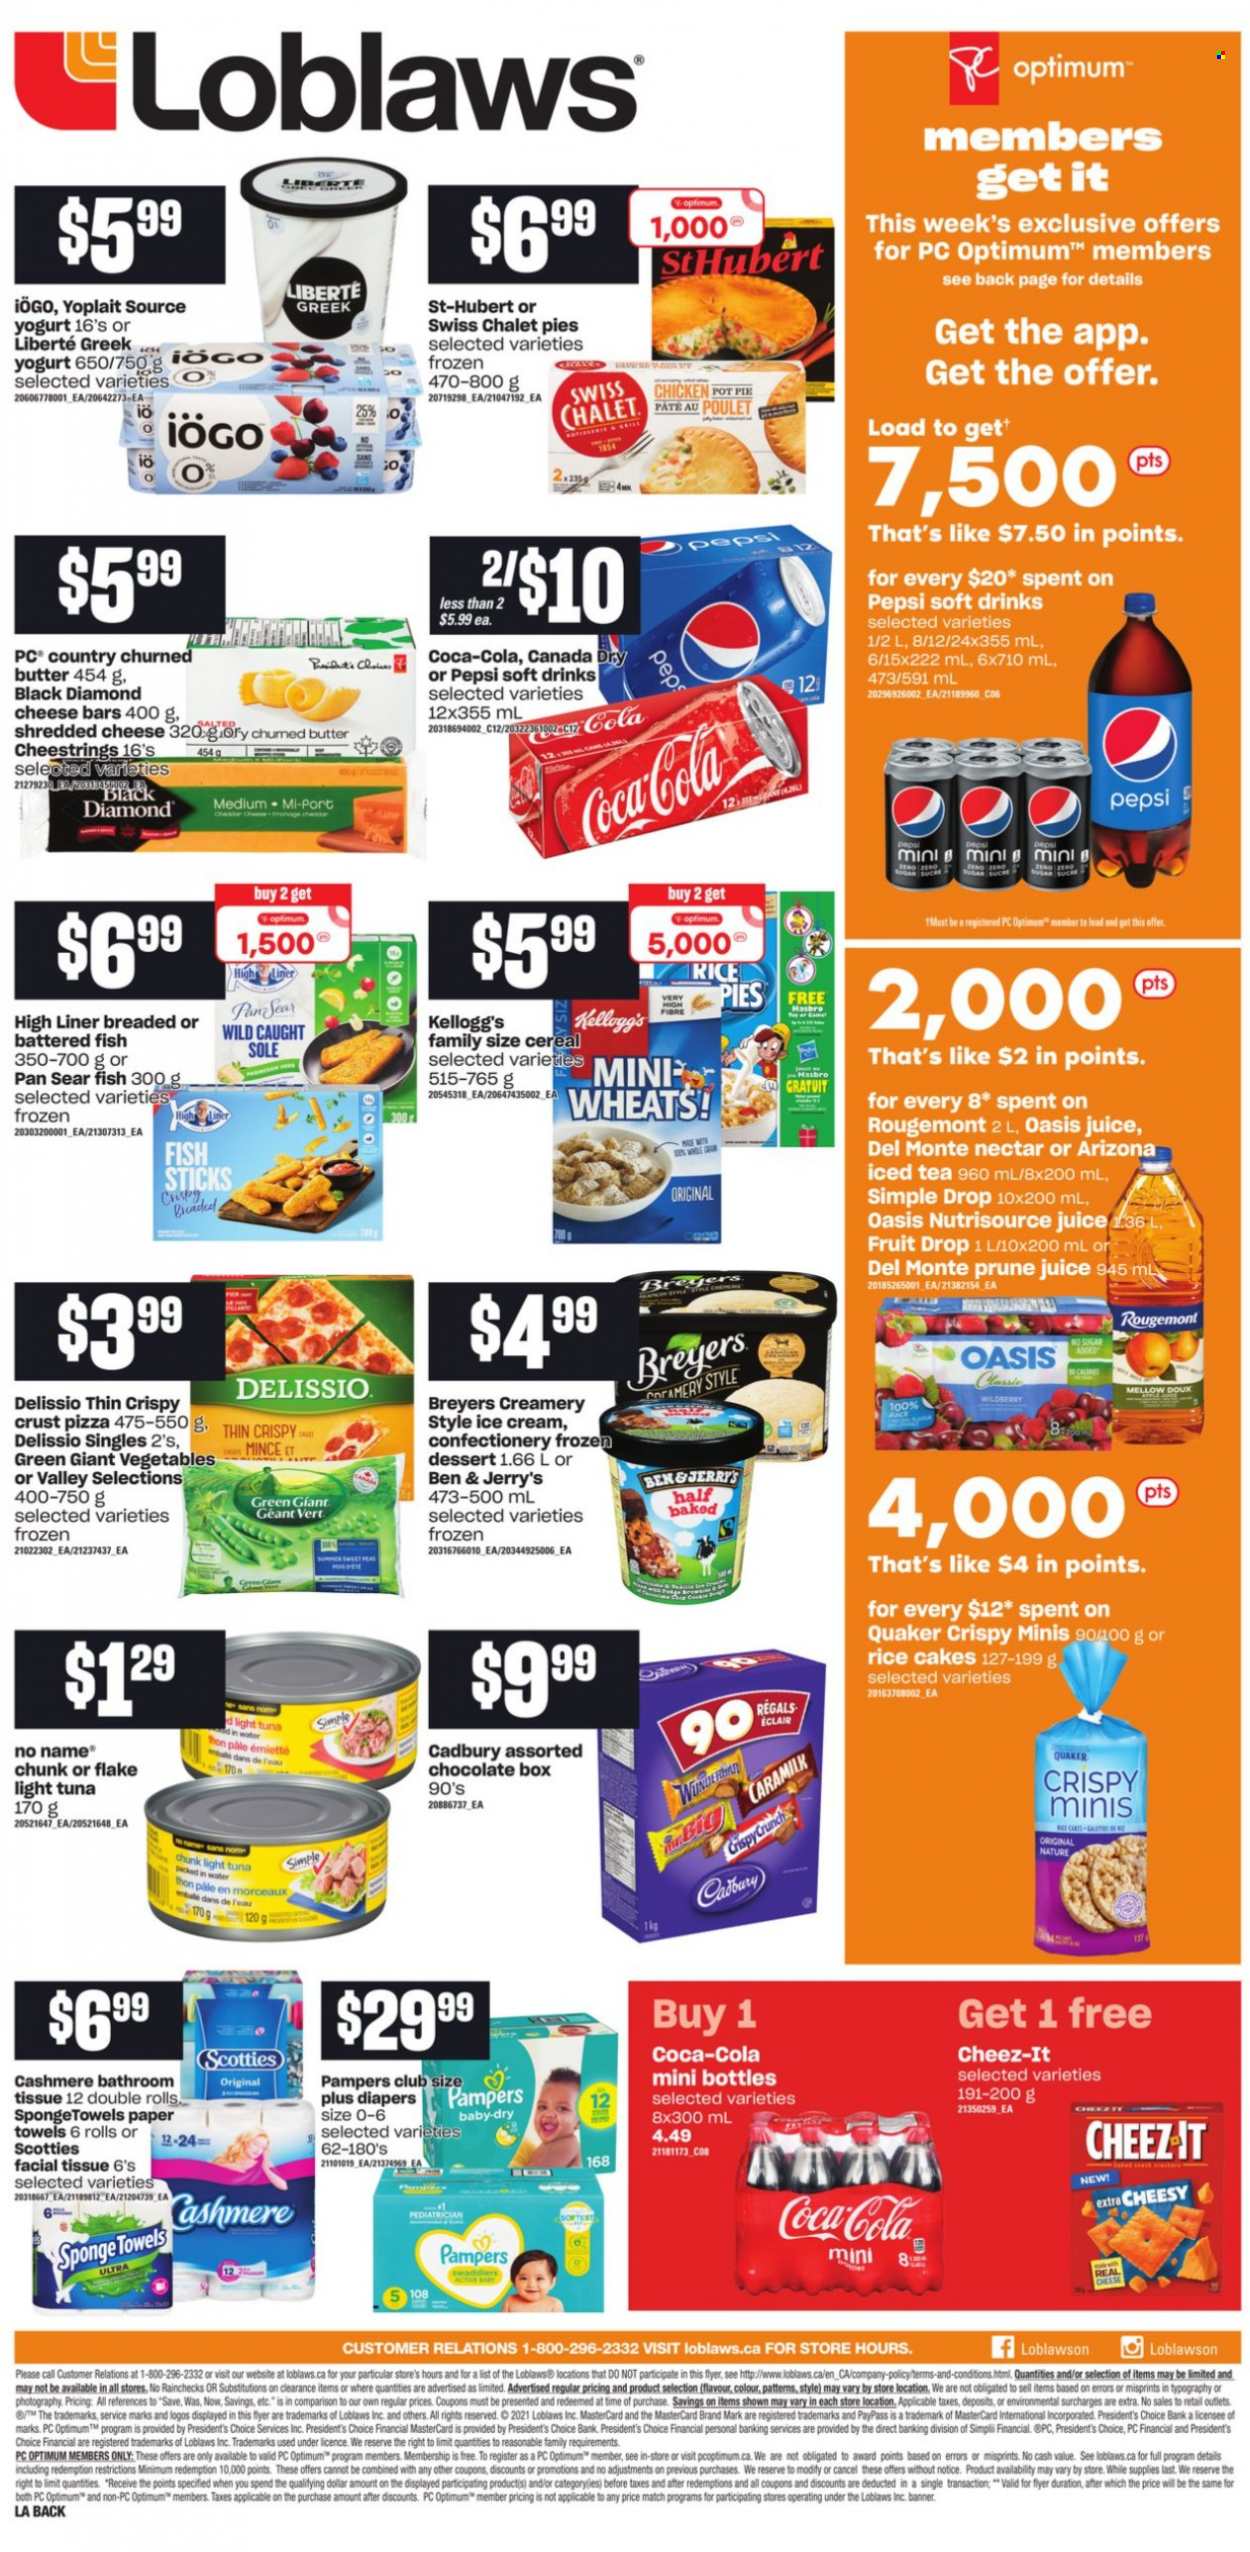 thumbnail - Loblaws Flyer - October 14, 2021 - October 20, 2021 - Sales products - pie, pot pie, tuna, fish, fish fingers, No Name, fish sticks, pizza, Quaker, shredded cheese, string cheese, Président, yoghurt, Yoplait, butter, ice cream, Ben & Jerry's, Kellogg's, Cadbury, Cheez-It, light tuna, cereals, Canada Dry, Coca-Cola, Pepsi, juice, ice tea, soft drink, AriZona, nappies, bath tissue, kitchen towels, paper towels, Optimum, NutriSource, Pampers. Page 2.